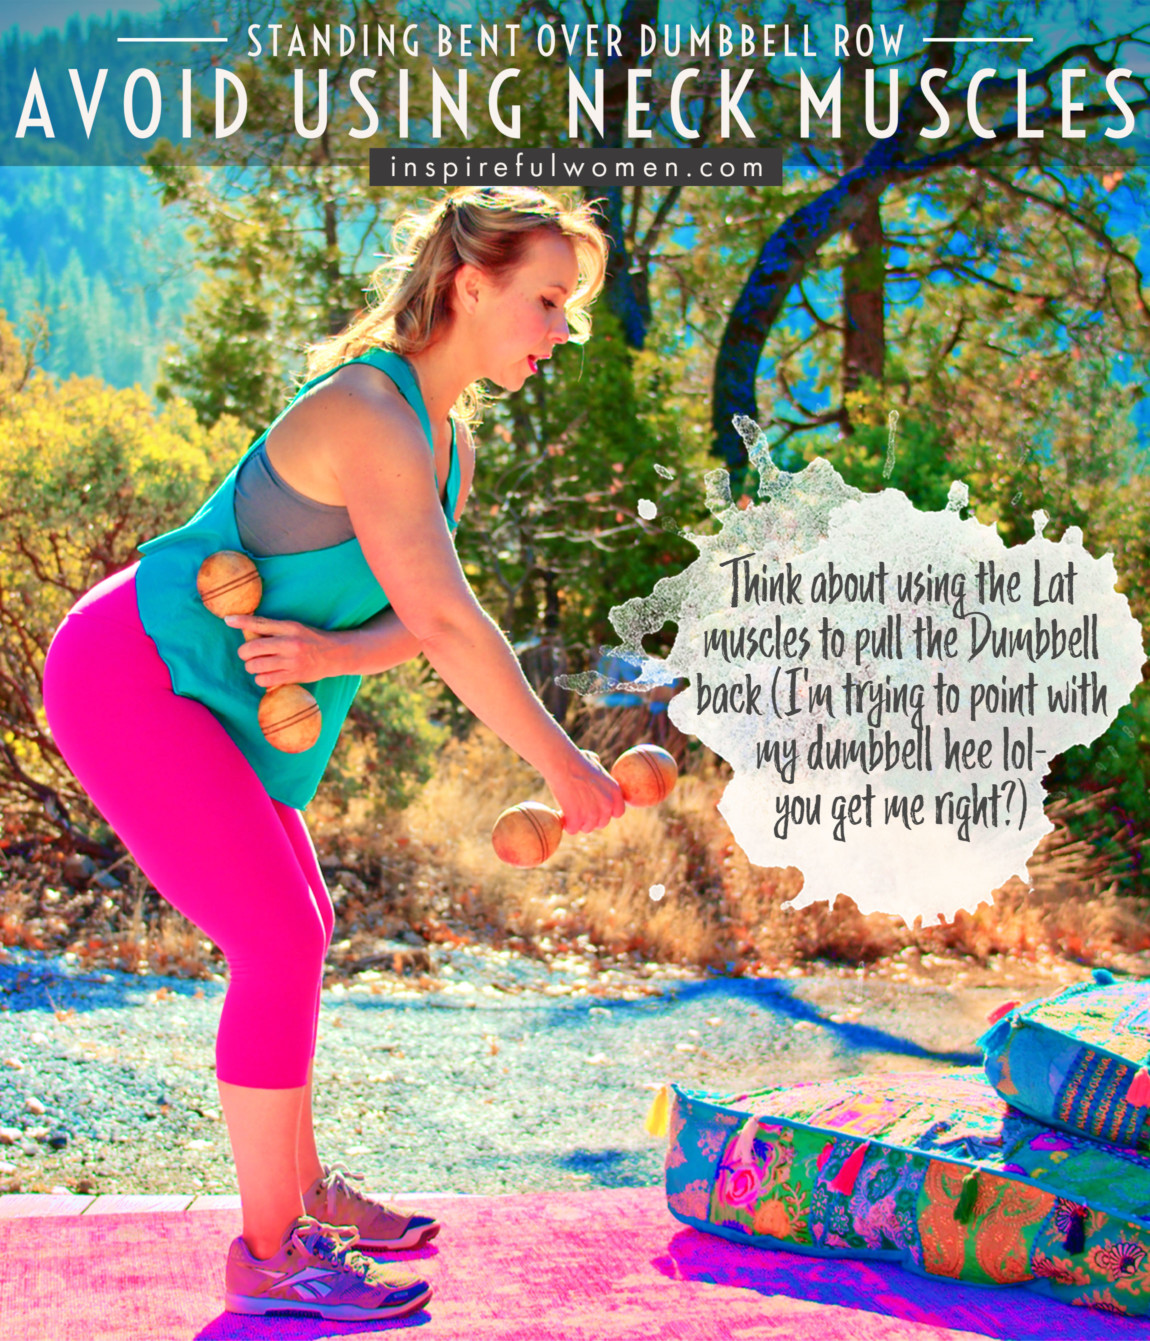 avoid-using-neck-muscles-two-arm-dumbbell-row-standing-bent-over-lat-latissimus-dorsi-exercise-common-mistakes